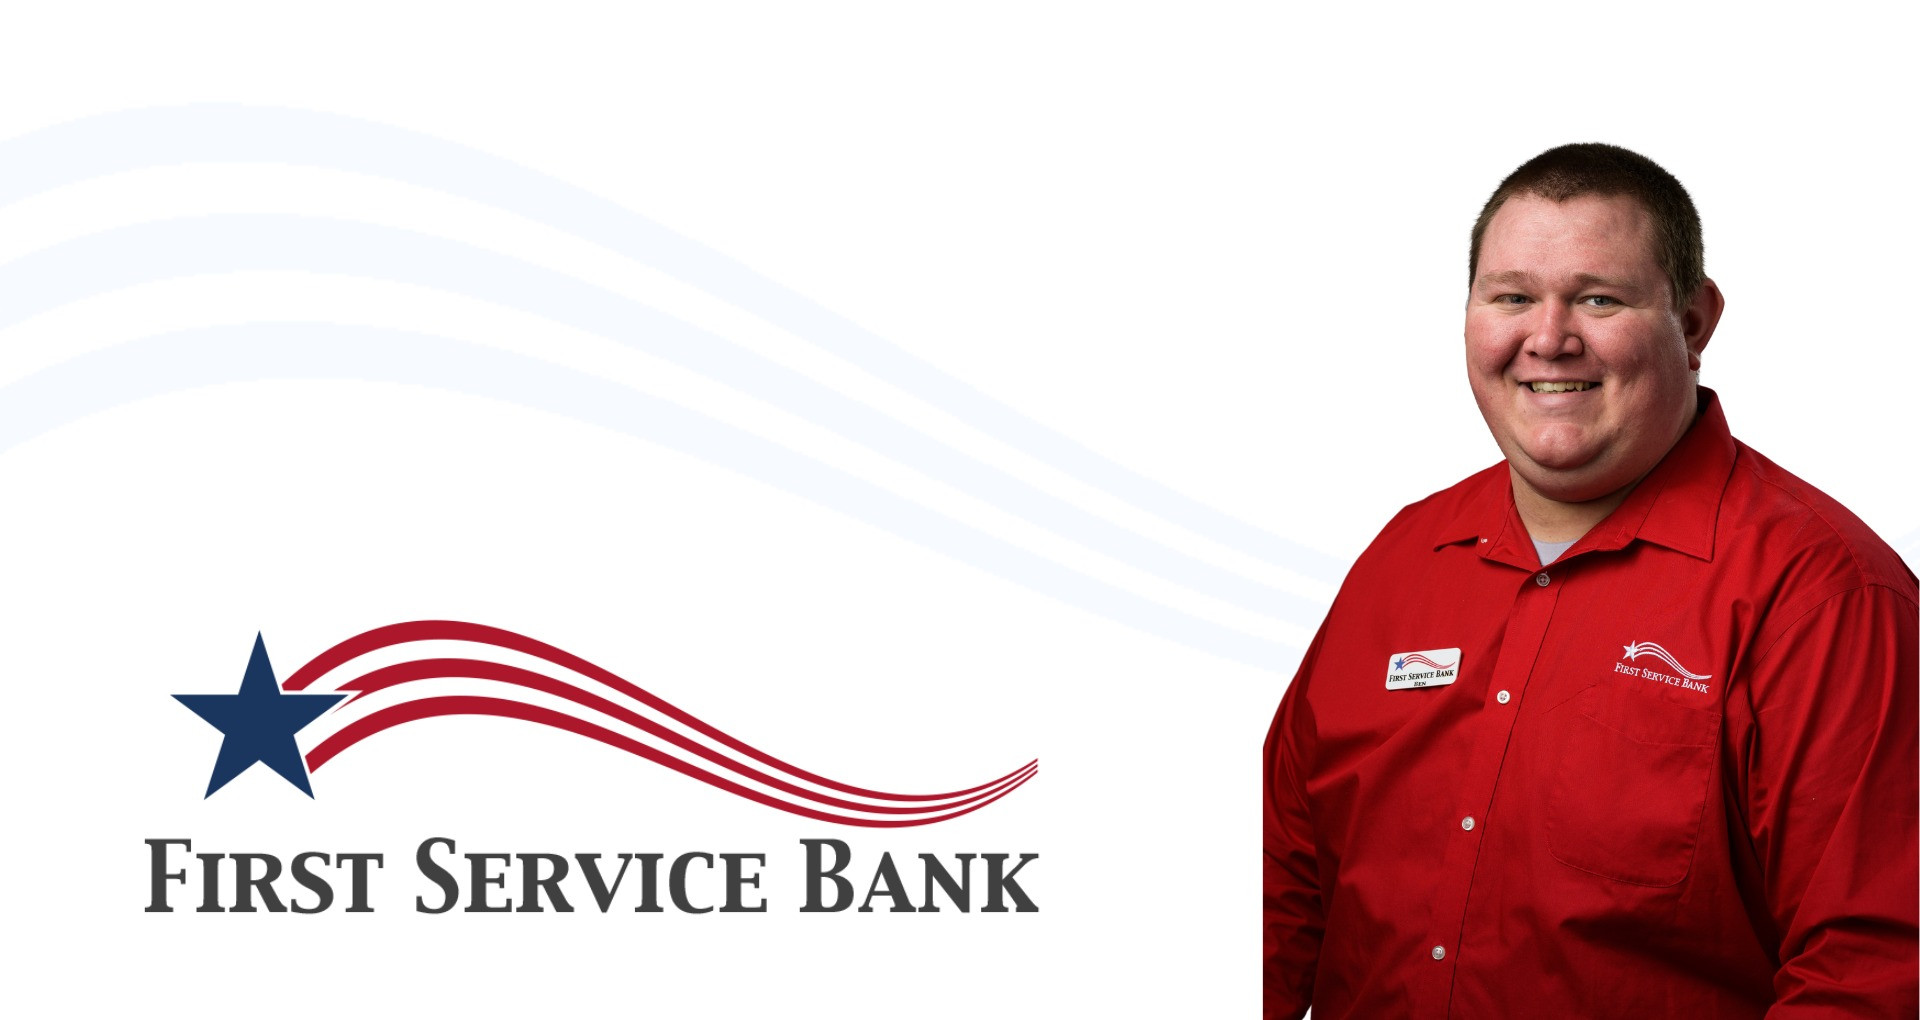 First Service Bank Promotes Ben Burrow to Assistant Branch Manager in Little Rock